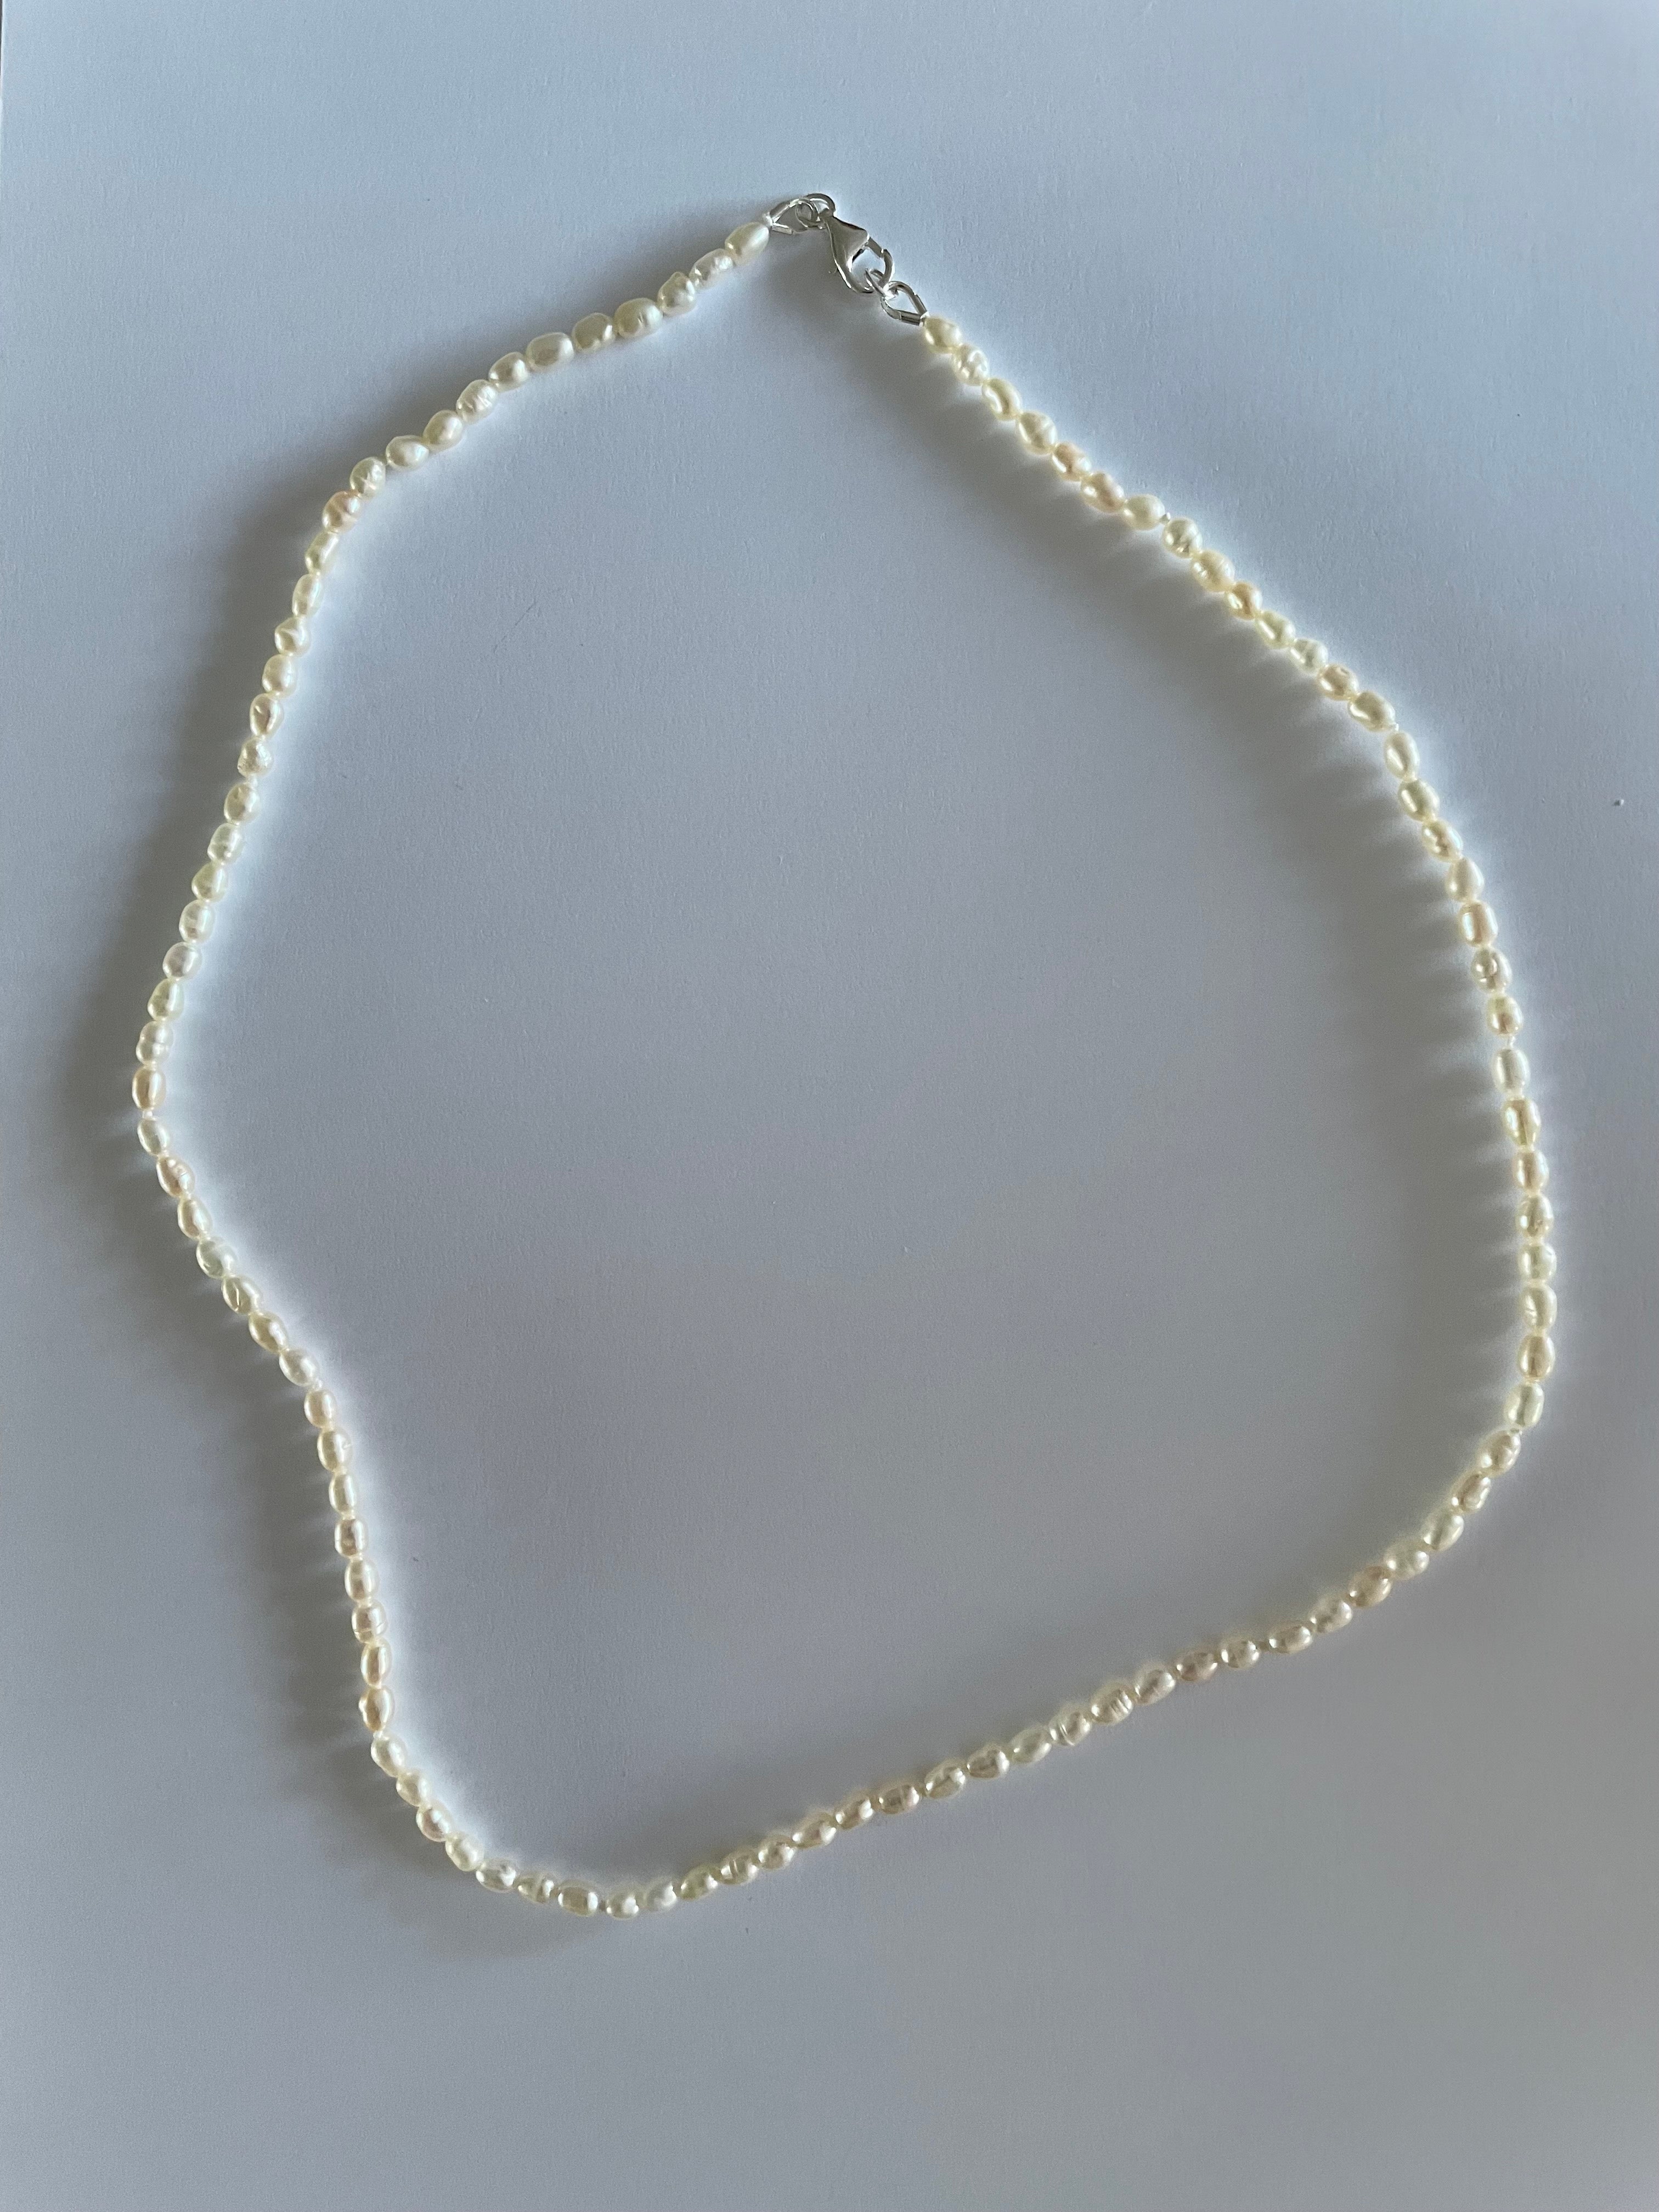 SEED PEARL CHOKER NECKLACE